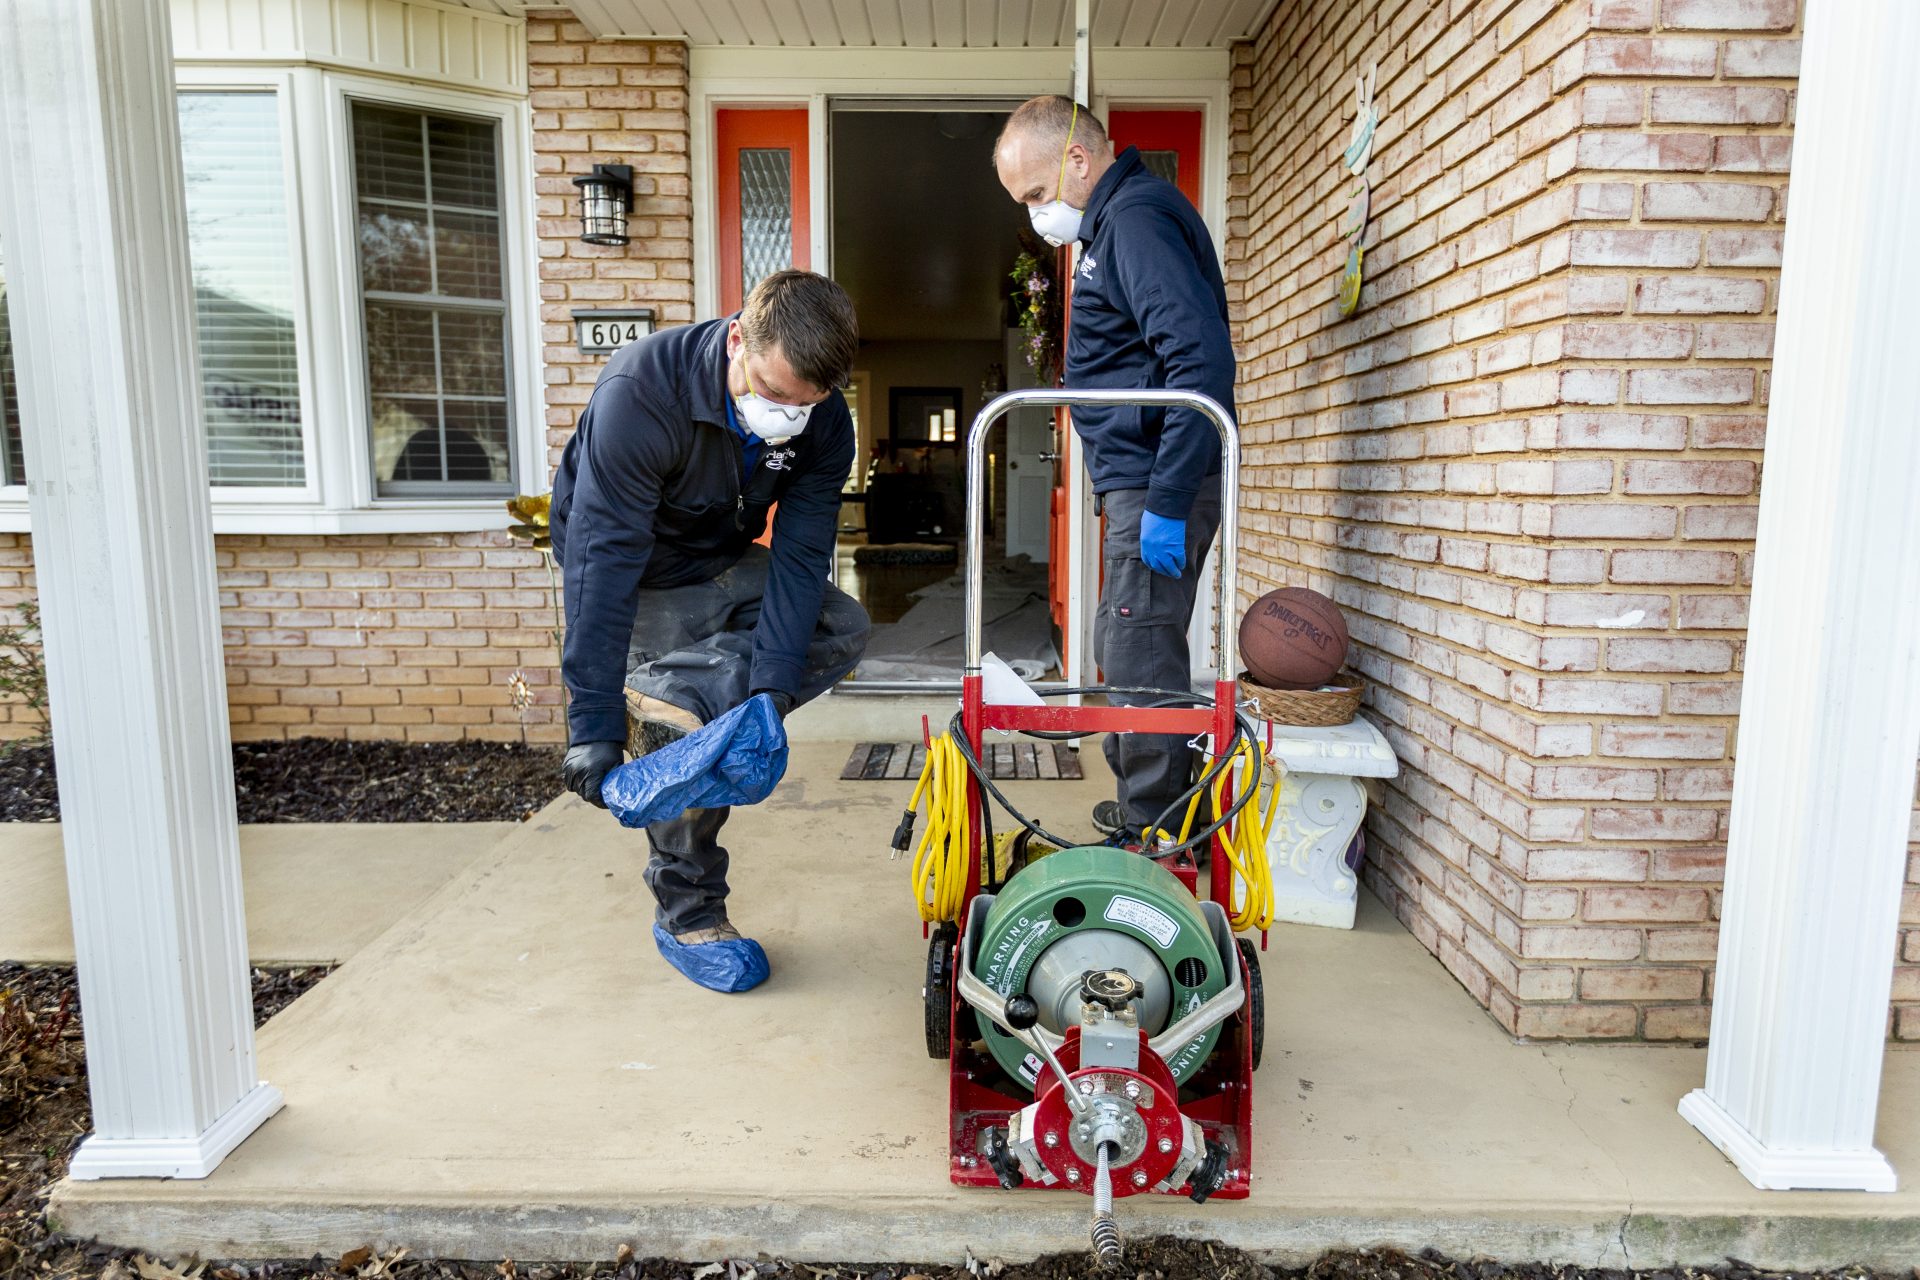 Shawn Stokes and Roger Renoll of Handyside Plumbing, HVAC & Electrical put on protective gear before entering a home in Mechanicsburg on April 7, 2020.